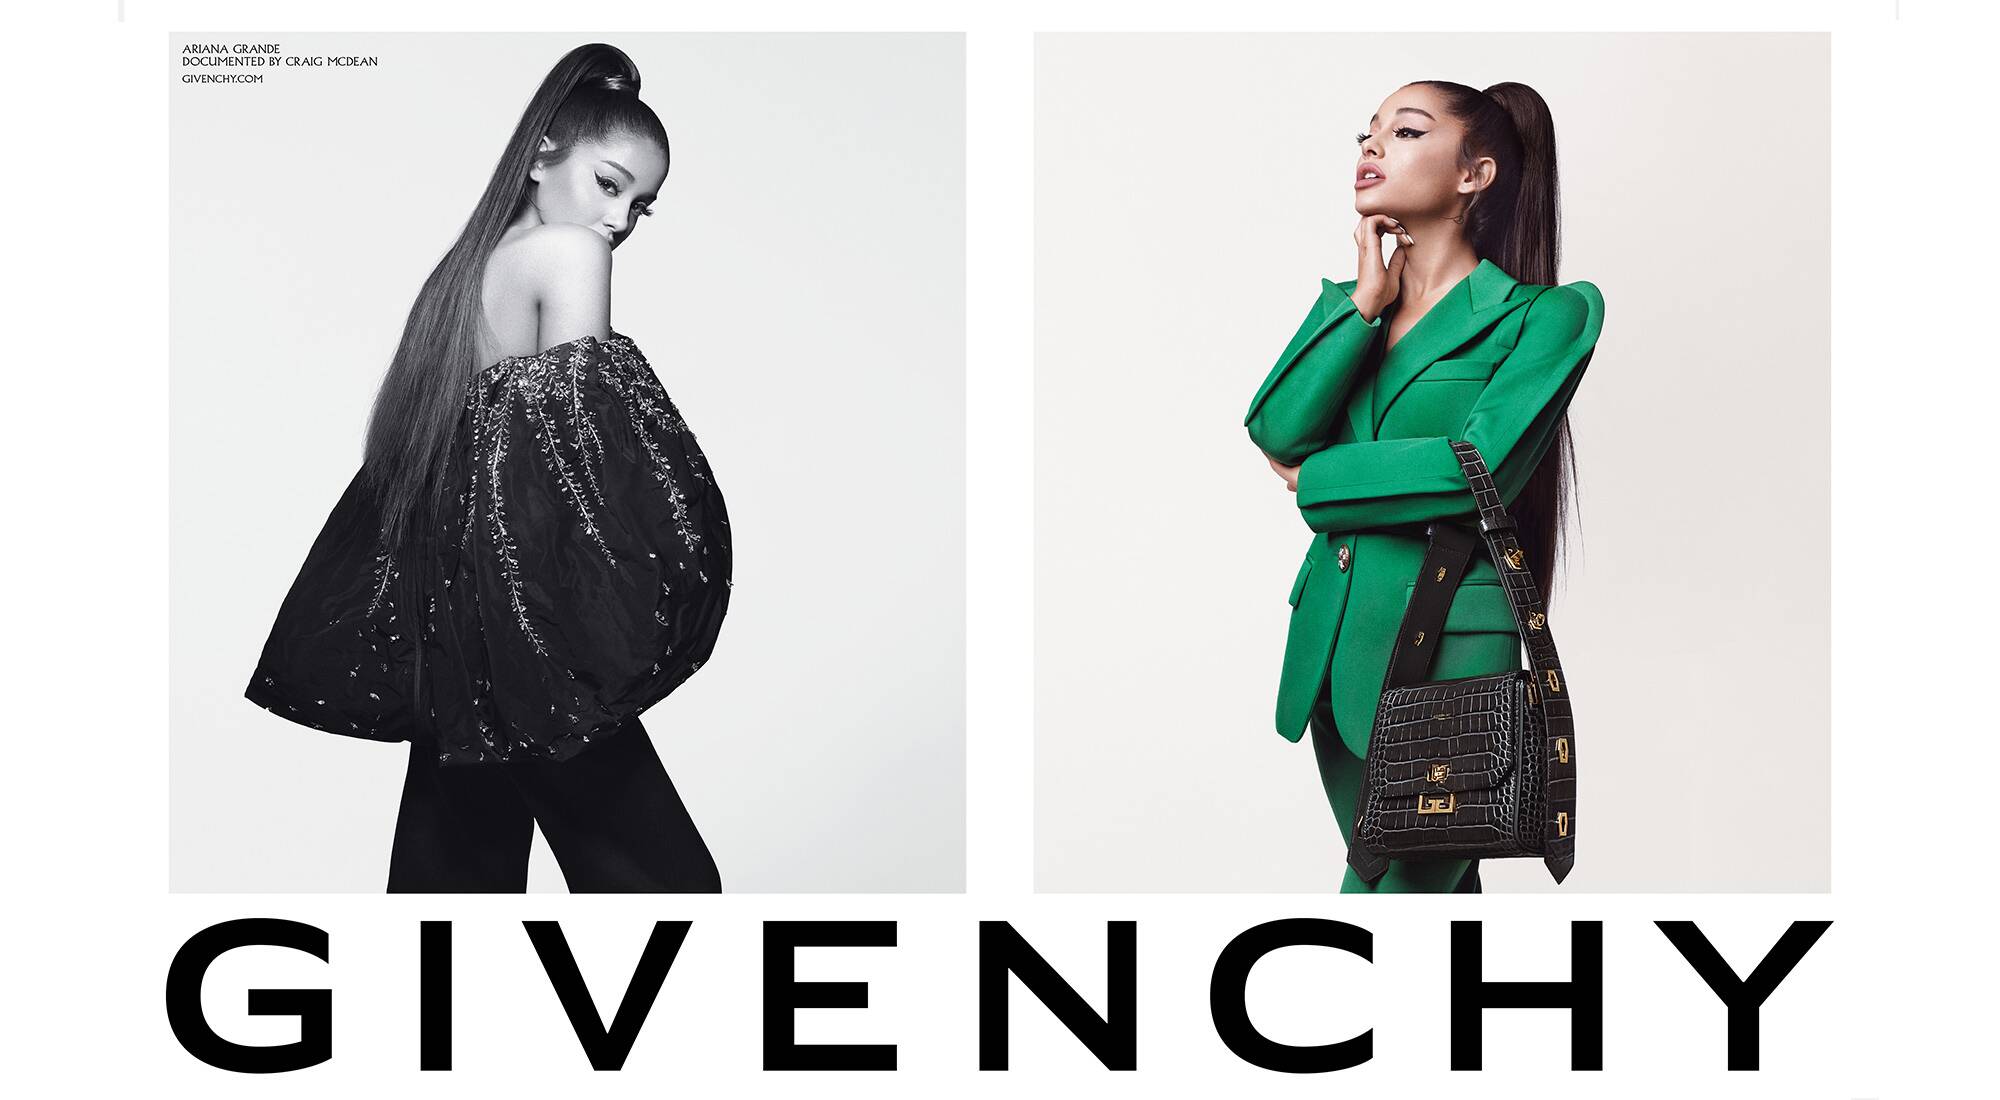 Givenchy unveils #Arivenchy campaign 